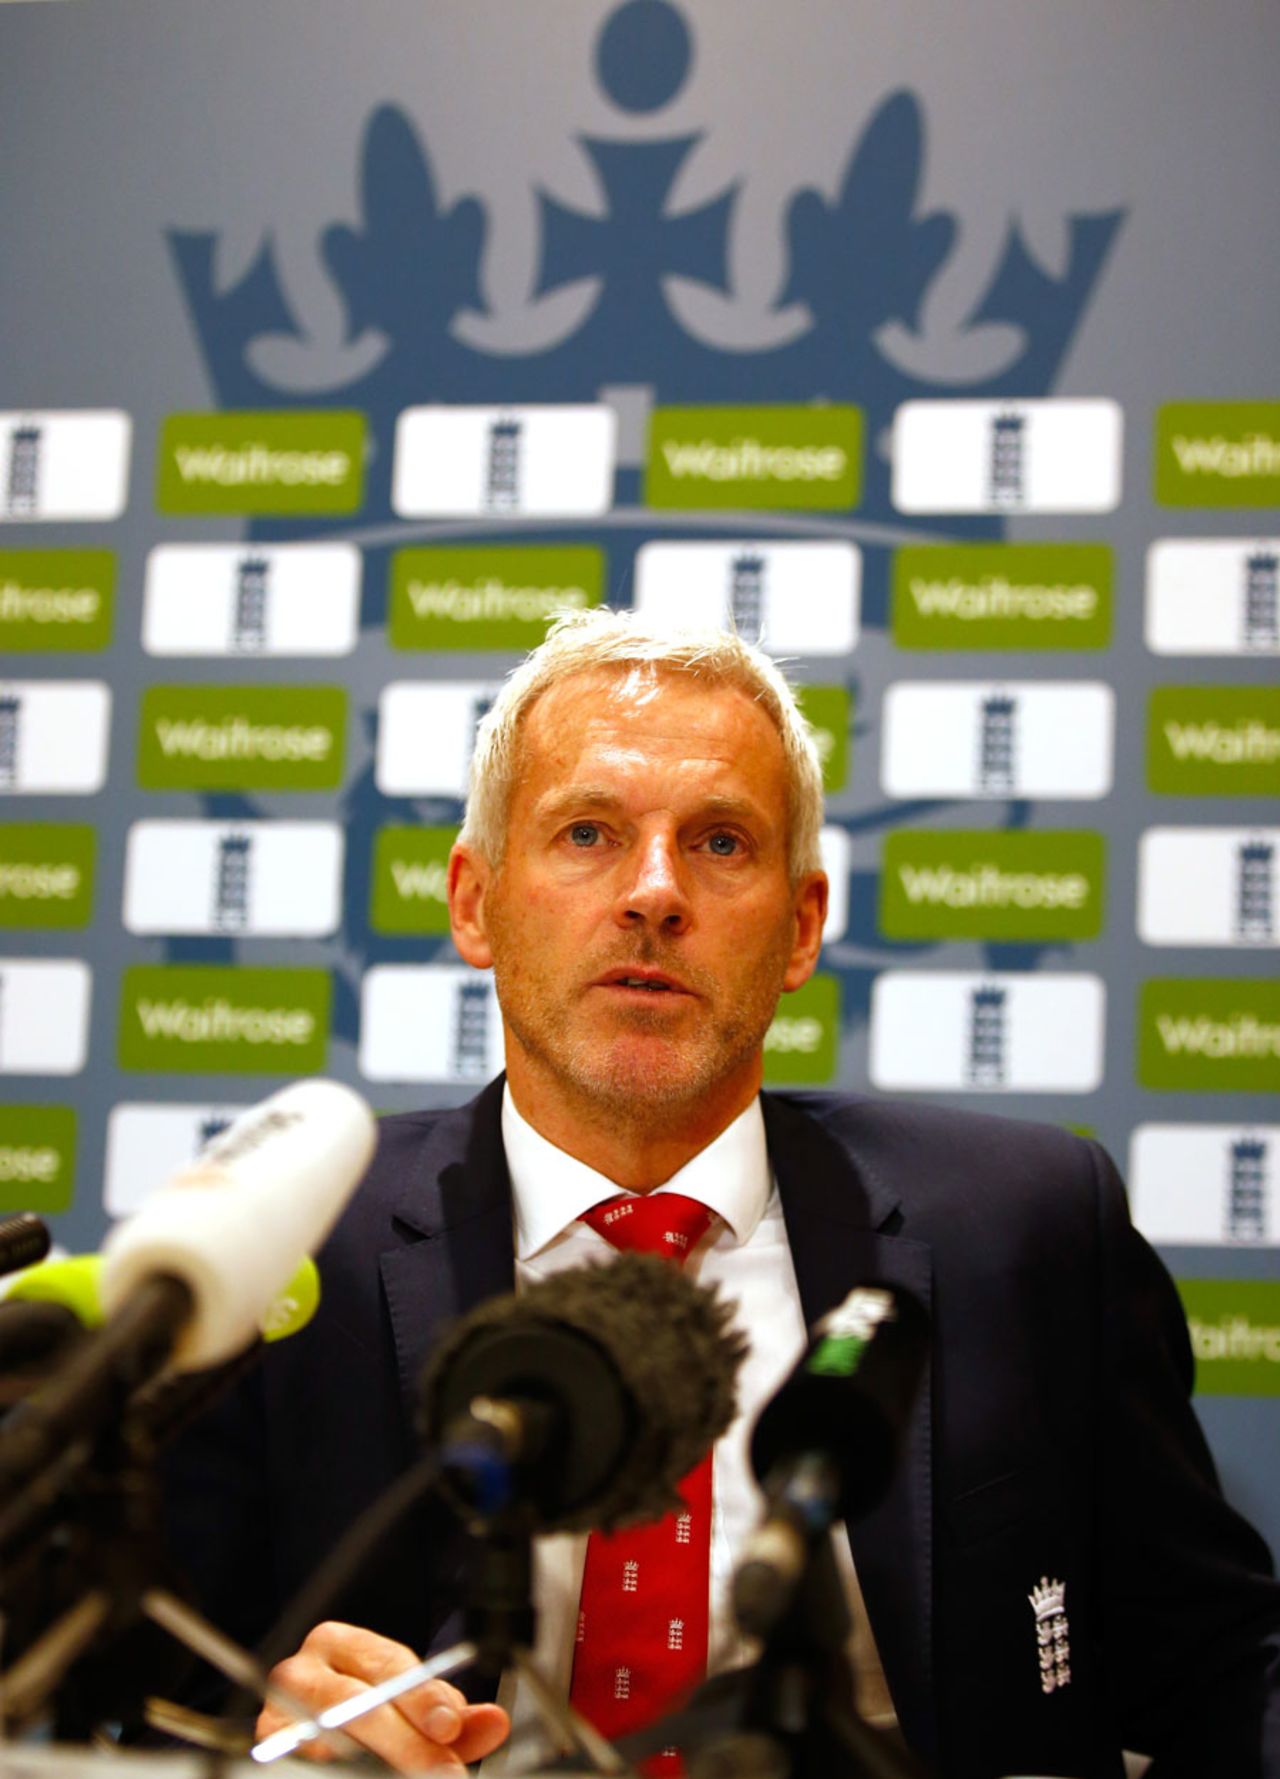 Peter Moores addressed the media before England departed for Australia, Heathrow airport, London, January 6, 2015